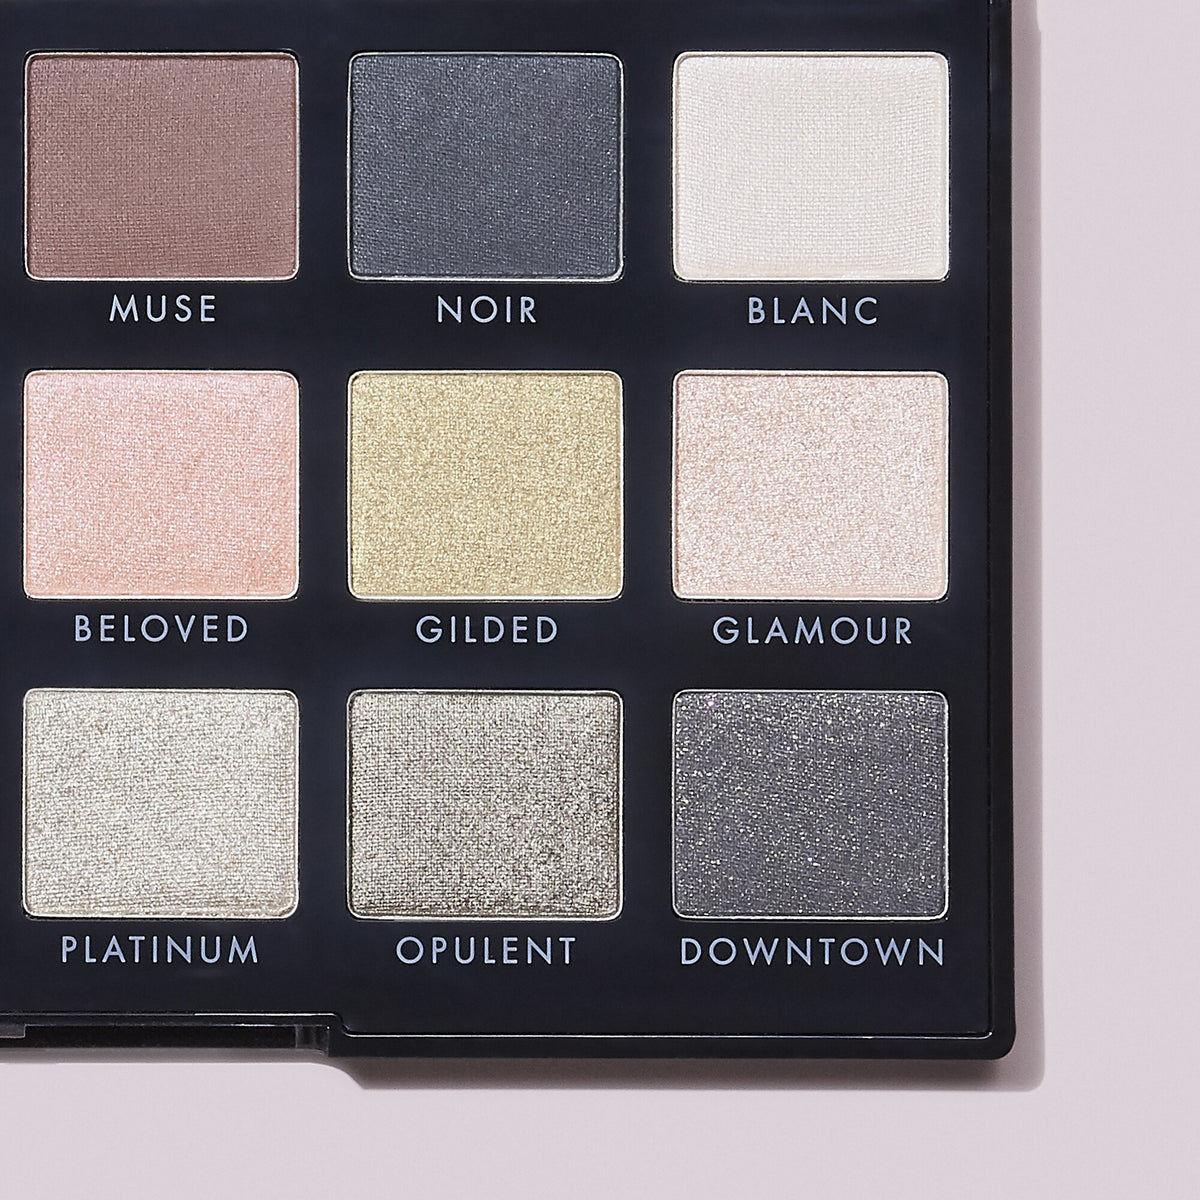 e.l.f. The New Classics Eyeshadow Palette Eyeshadow palette Volare Makeup   